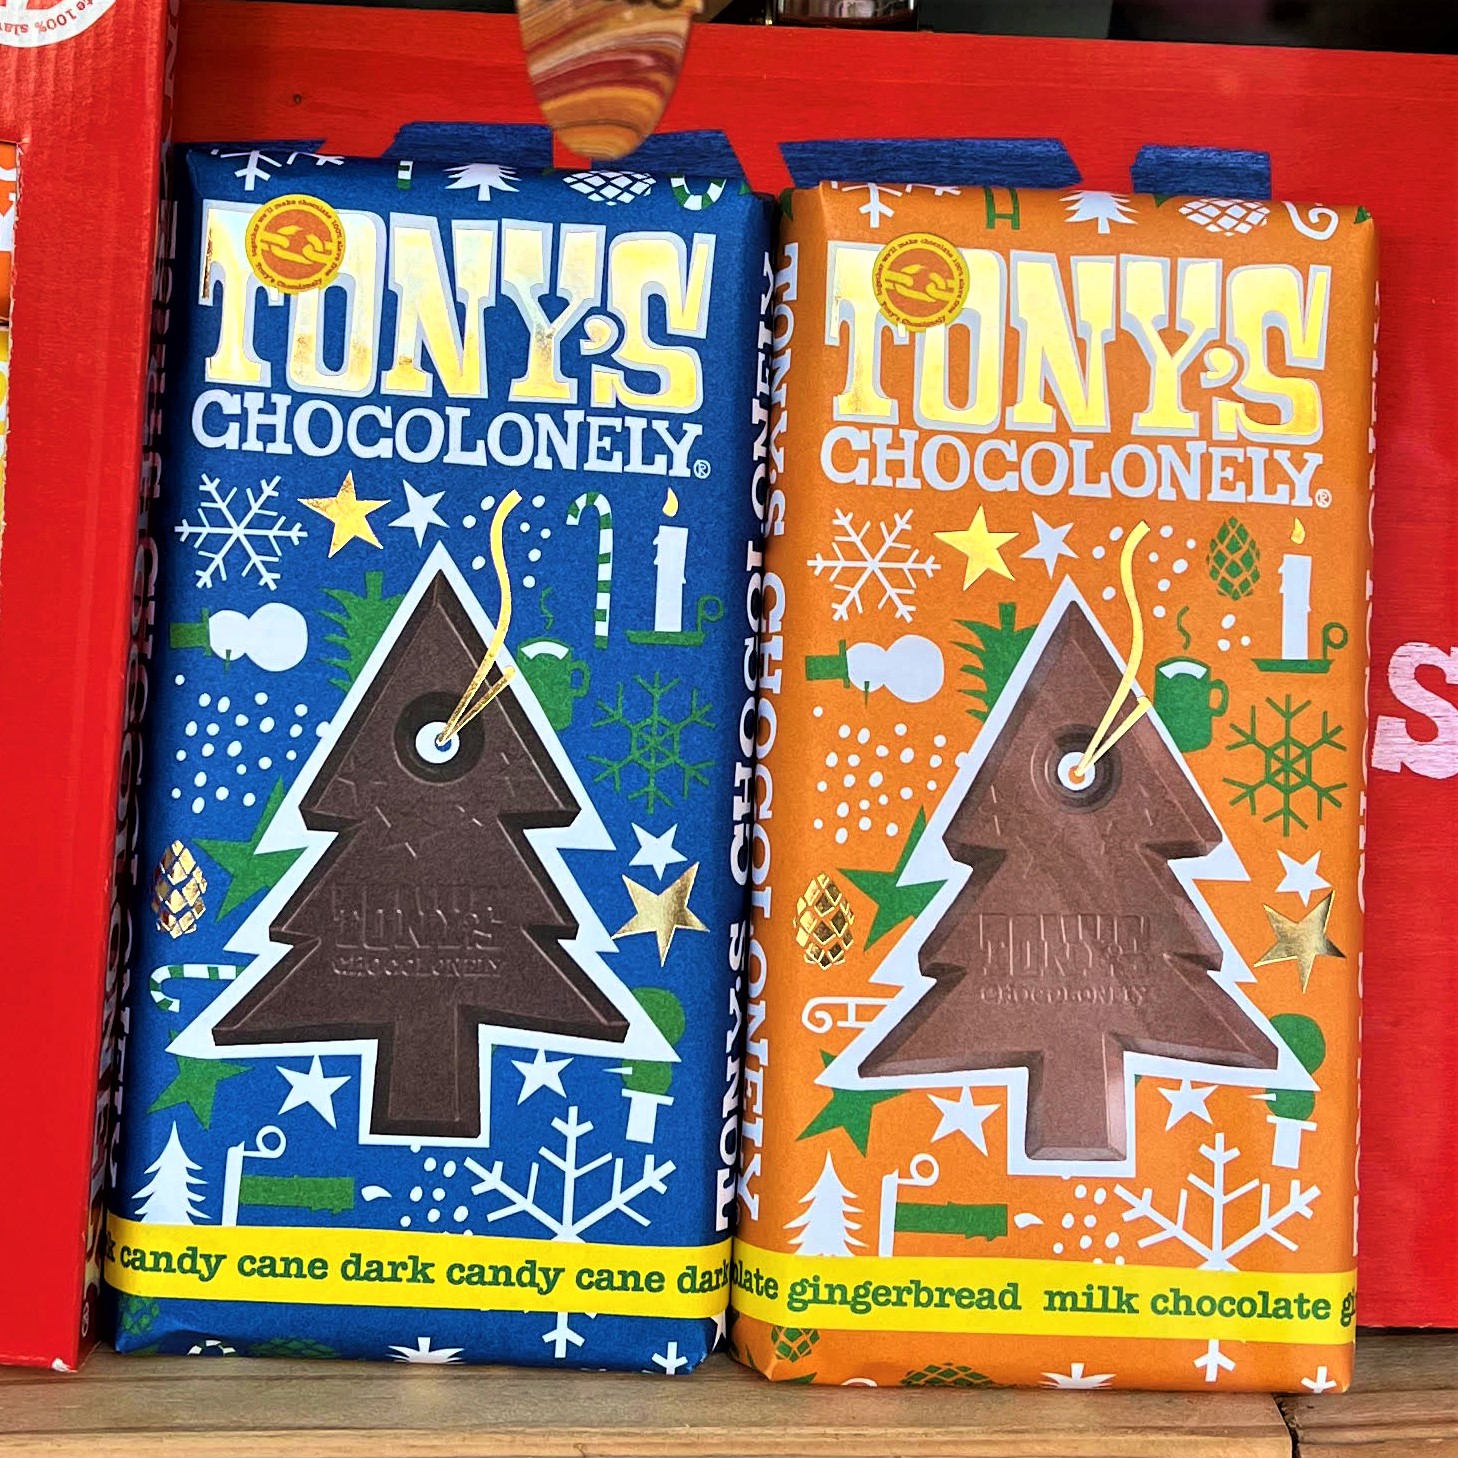 Unavailable - Christmas Chocolate bar (180g) by Tony's Chocolonely (Faitrade)